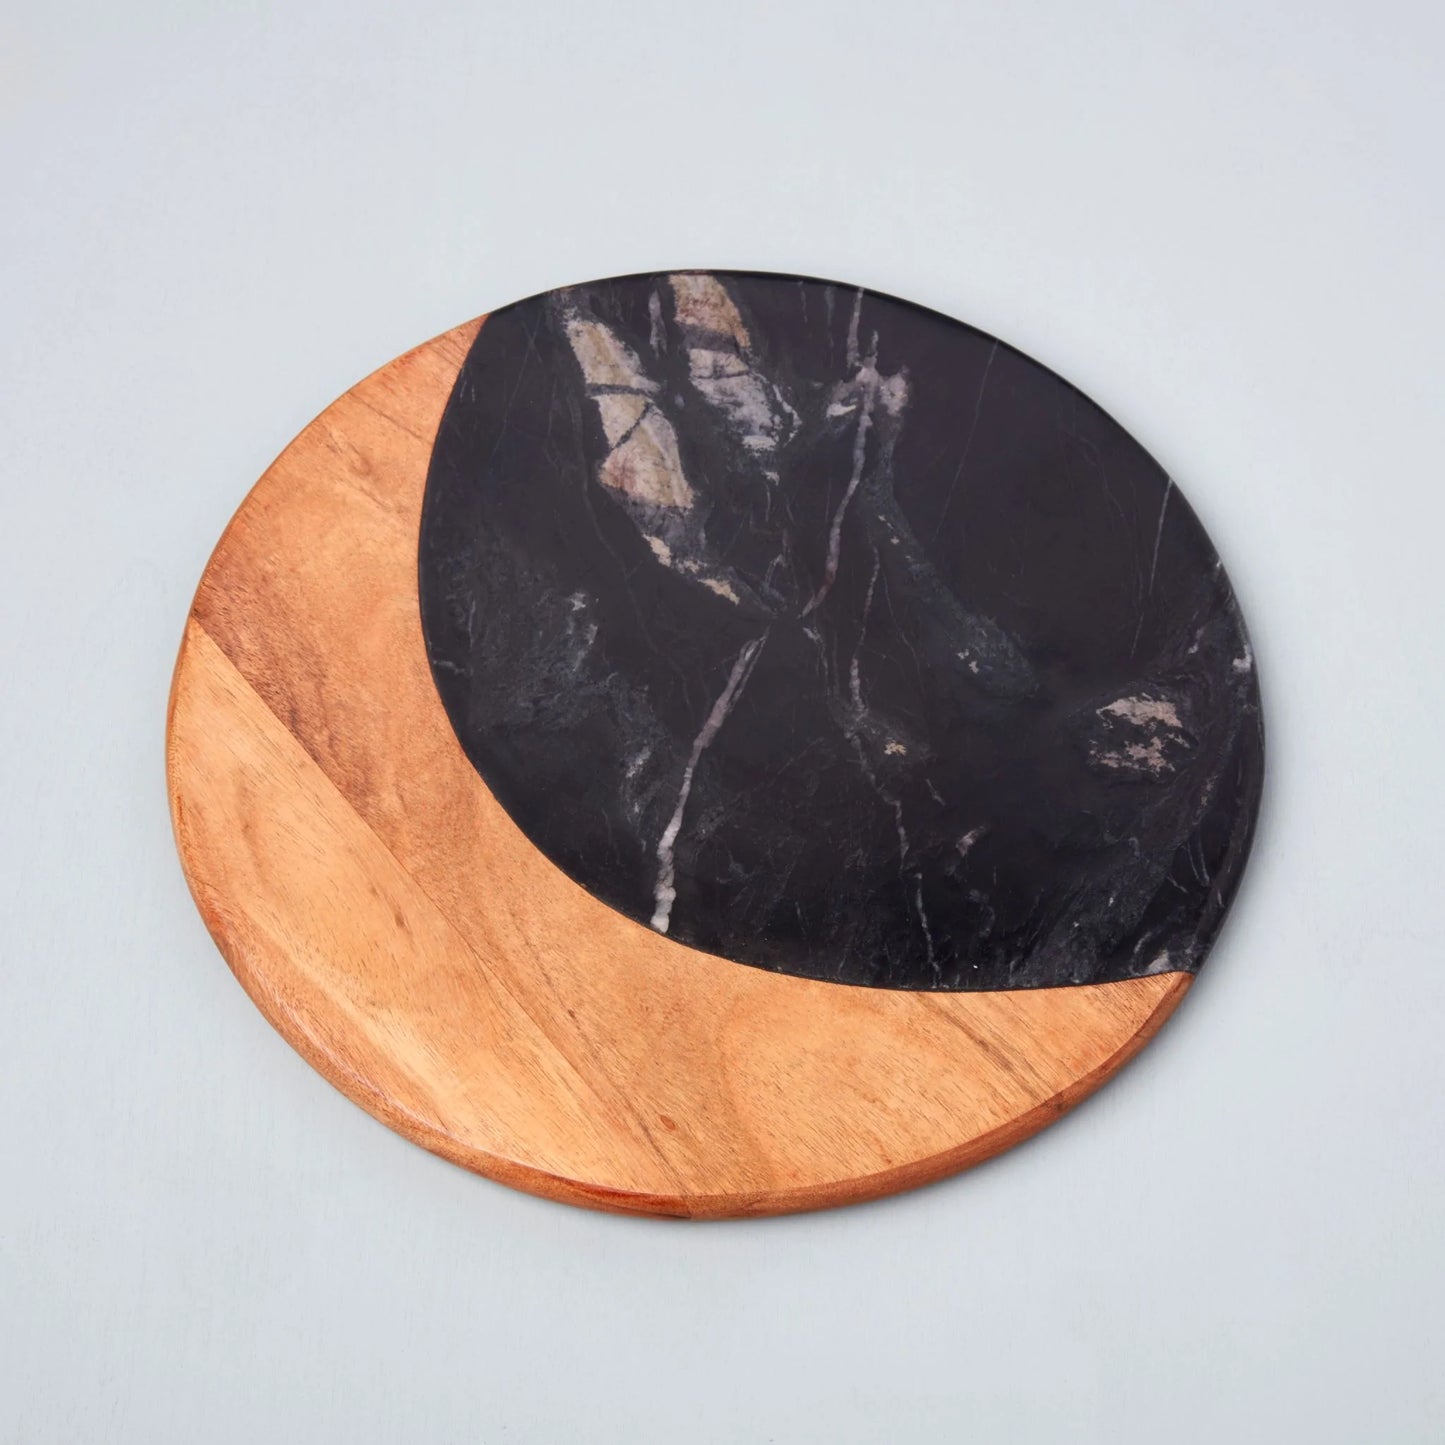 Helena Black Marble Round Board: Sophisticated Helena black marble round board from Grace Blu Shoppe, perfect for serving charcuterie or as a stylish centerpiece.